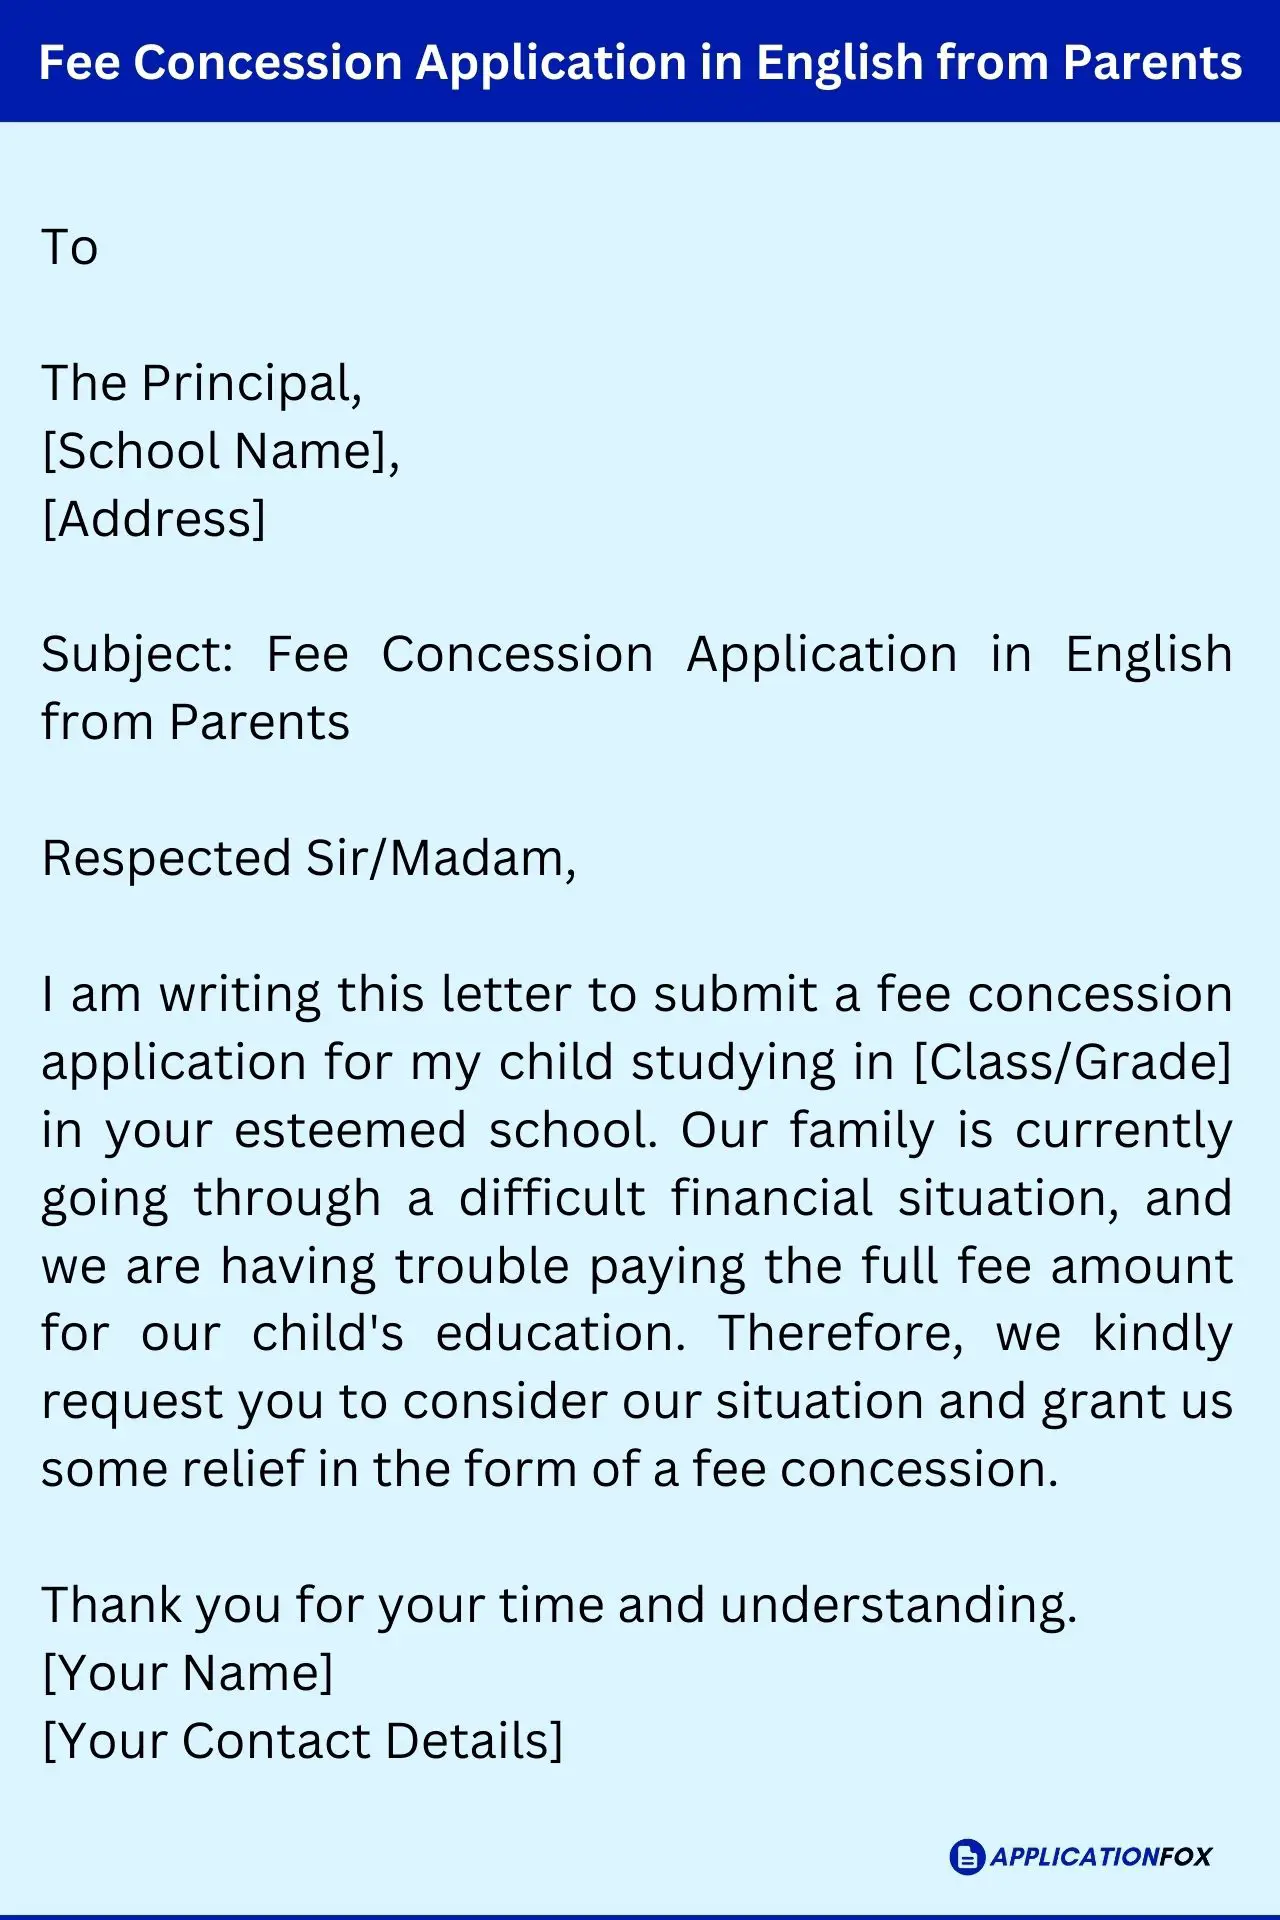 Fee Concession Application in English from Parents